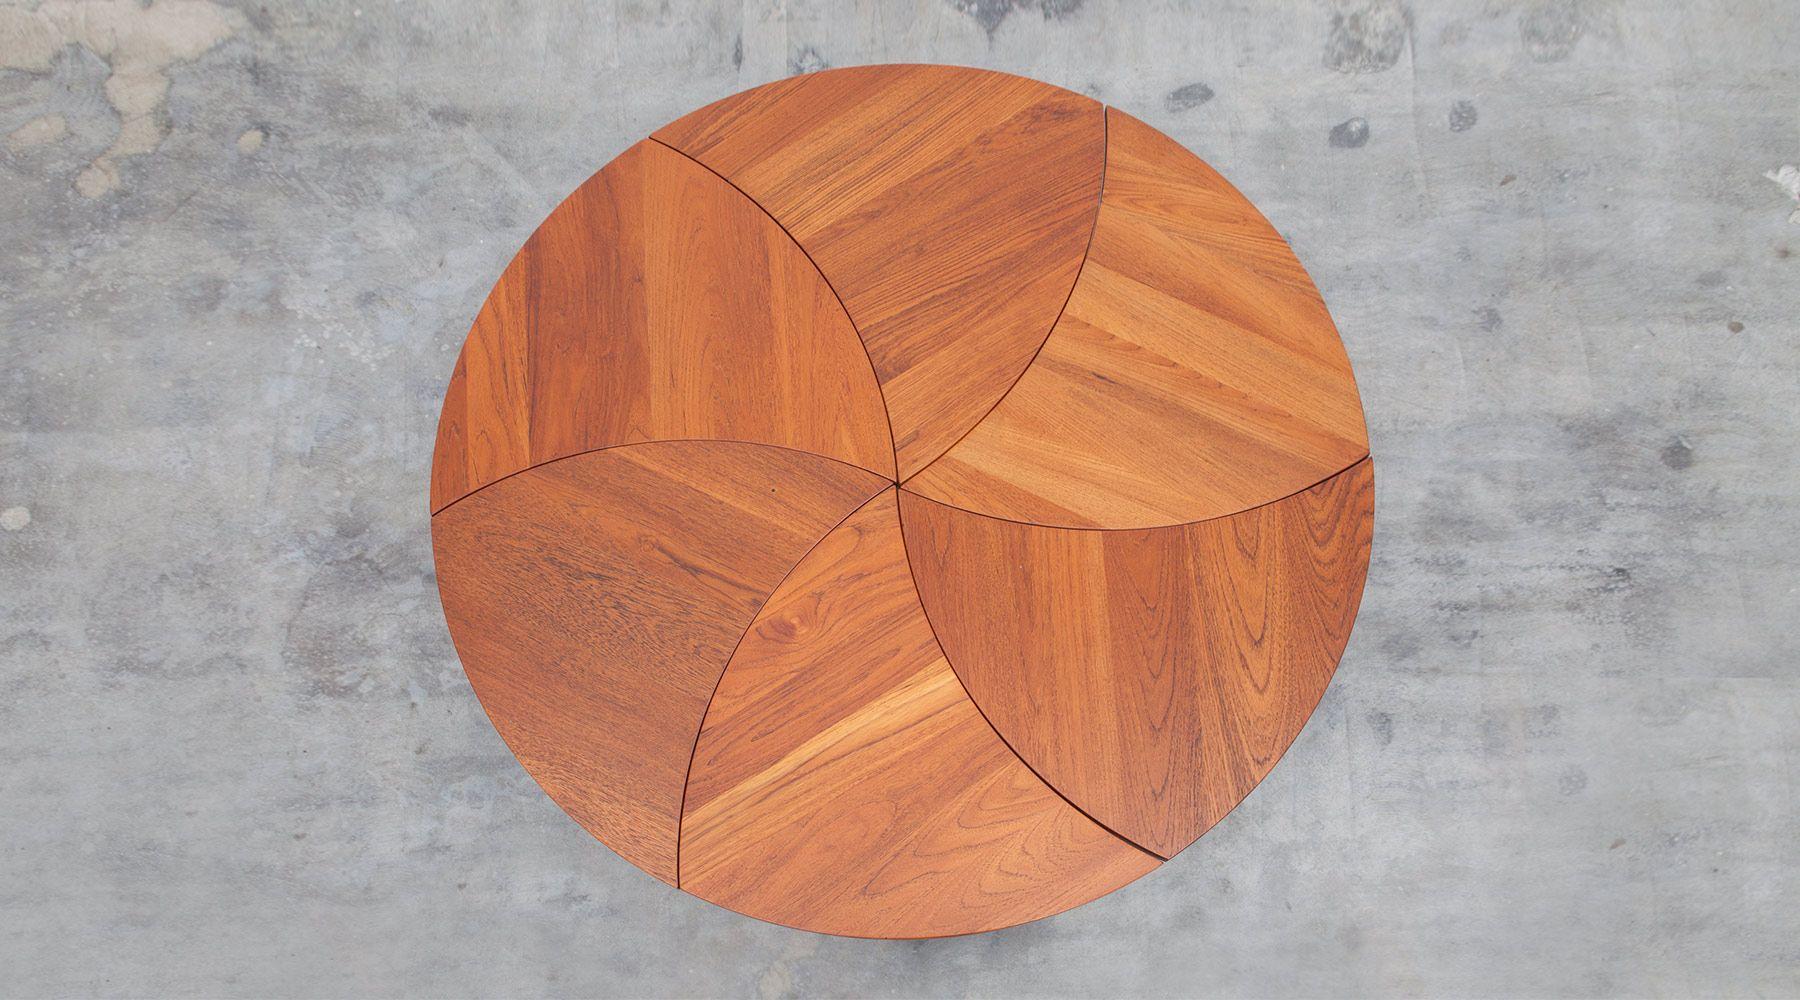 Set of six crescent shaped coffee tables, teak, by Peter Hvidt & Orla Mølgaard-Nielsen, Denmark, 1952

Outstanding collection of six crescent shaped coffee tables that can be arranged in several ways. The teak has a wonderful structure and is